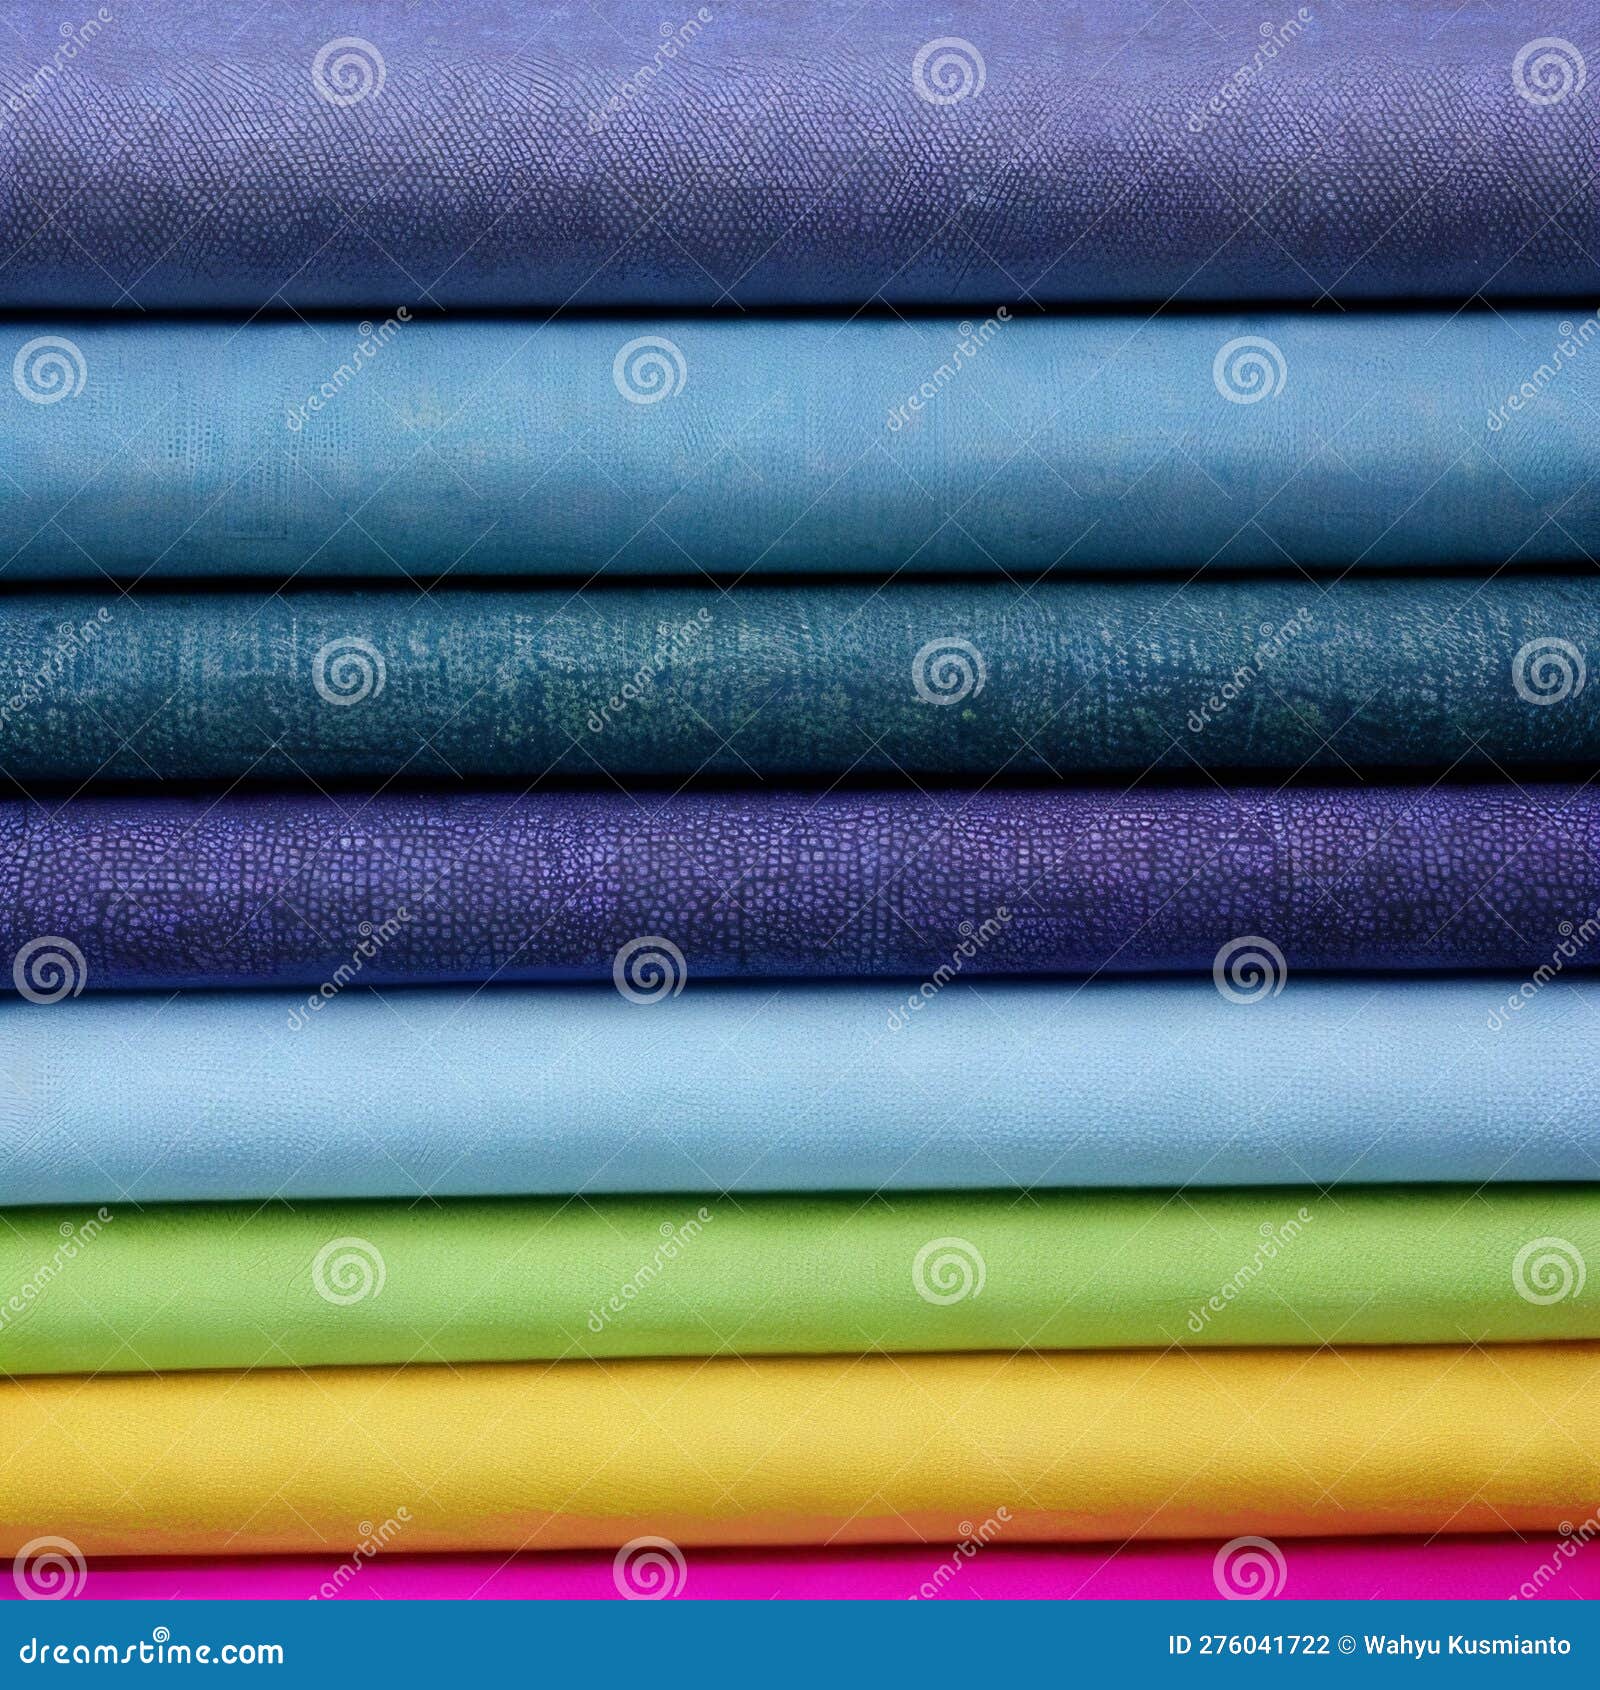 textile or fabric texture.  on backgrounf, with random color